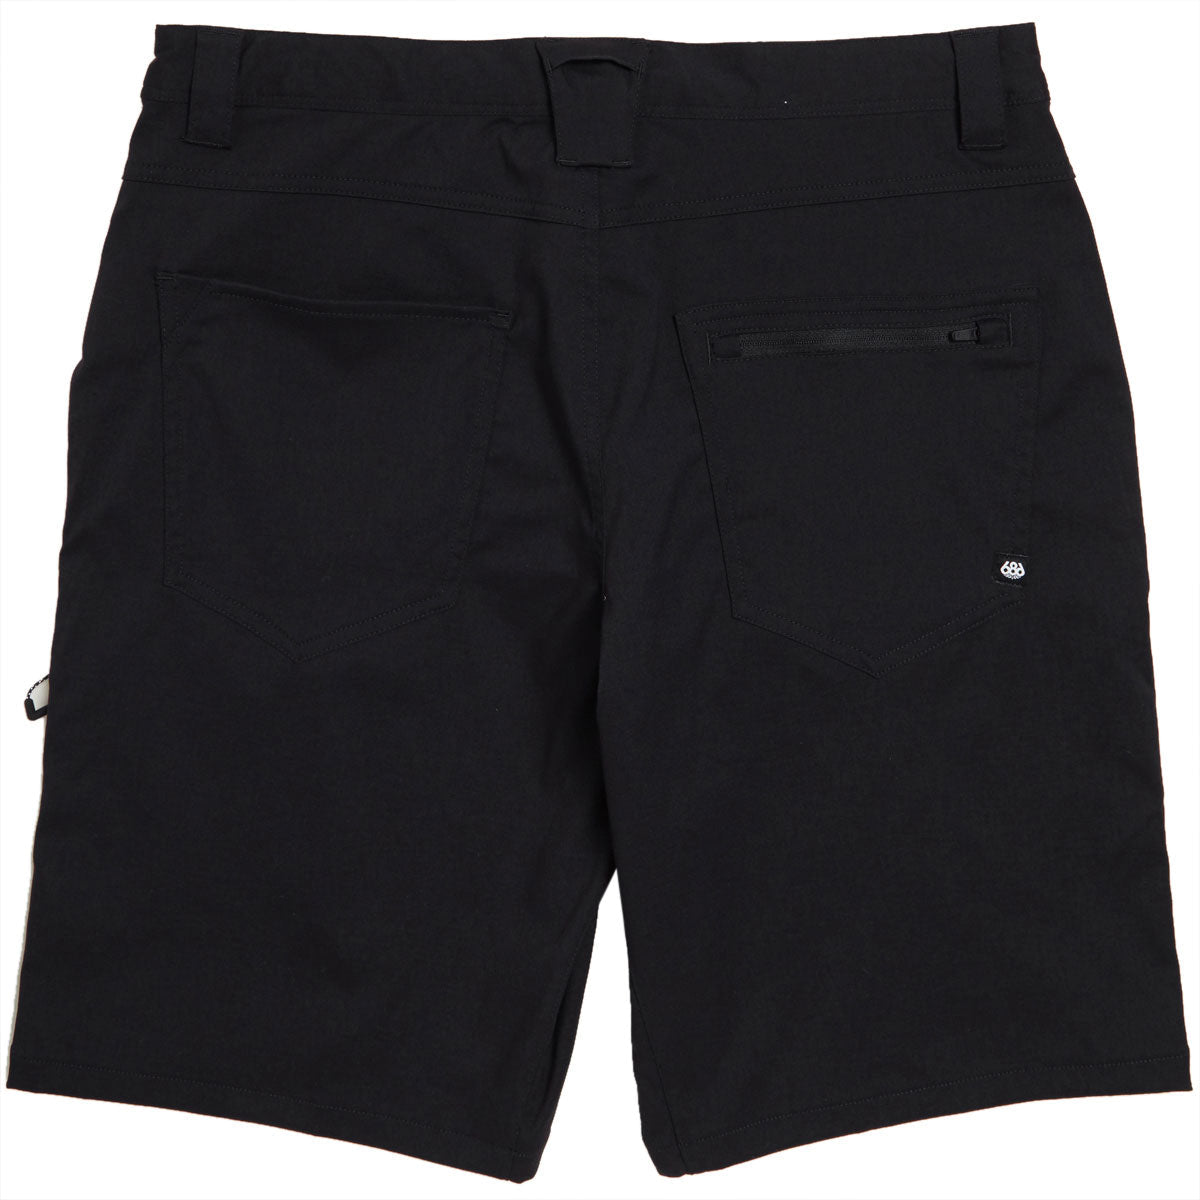 686 Everywhere Hybrid Relaxed Fit Shorts - Black image 5